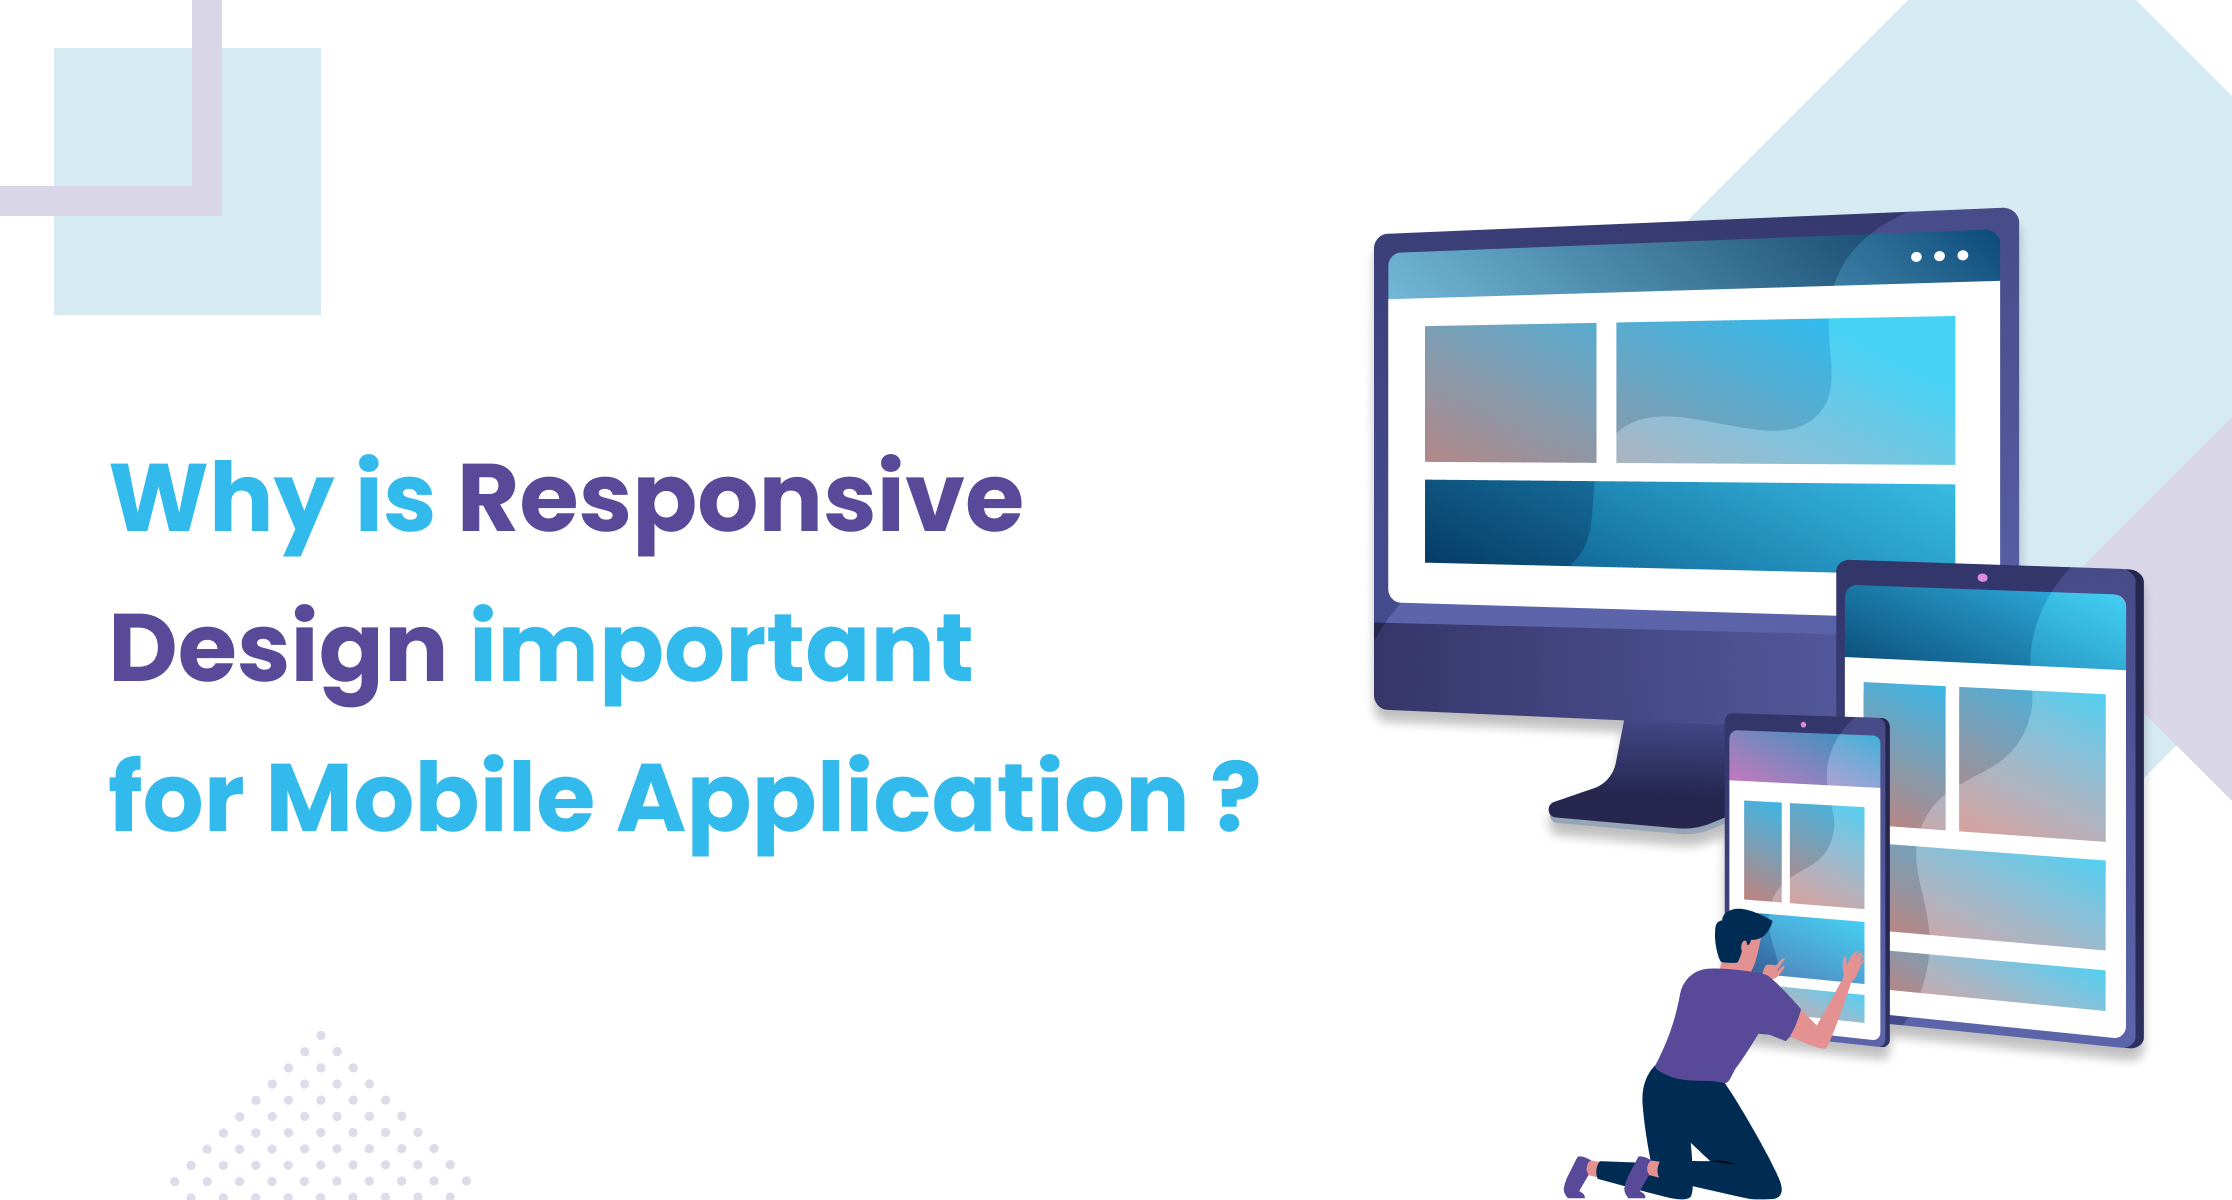 Why is Responsive Design important for Mobile Apps